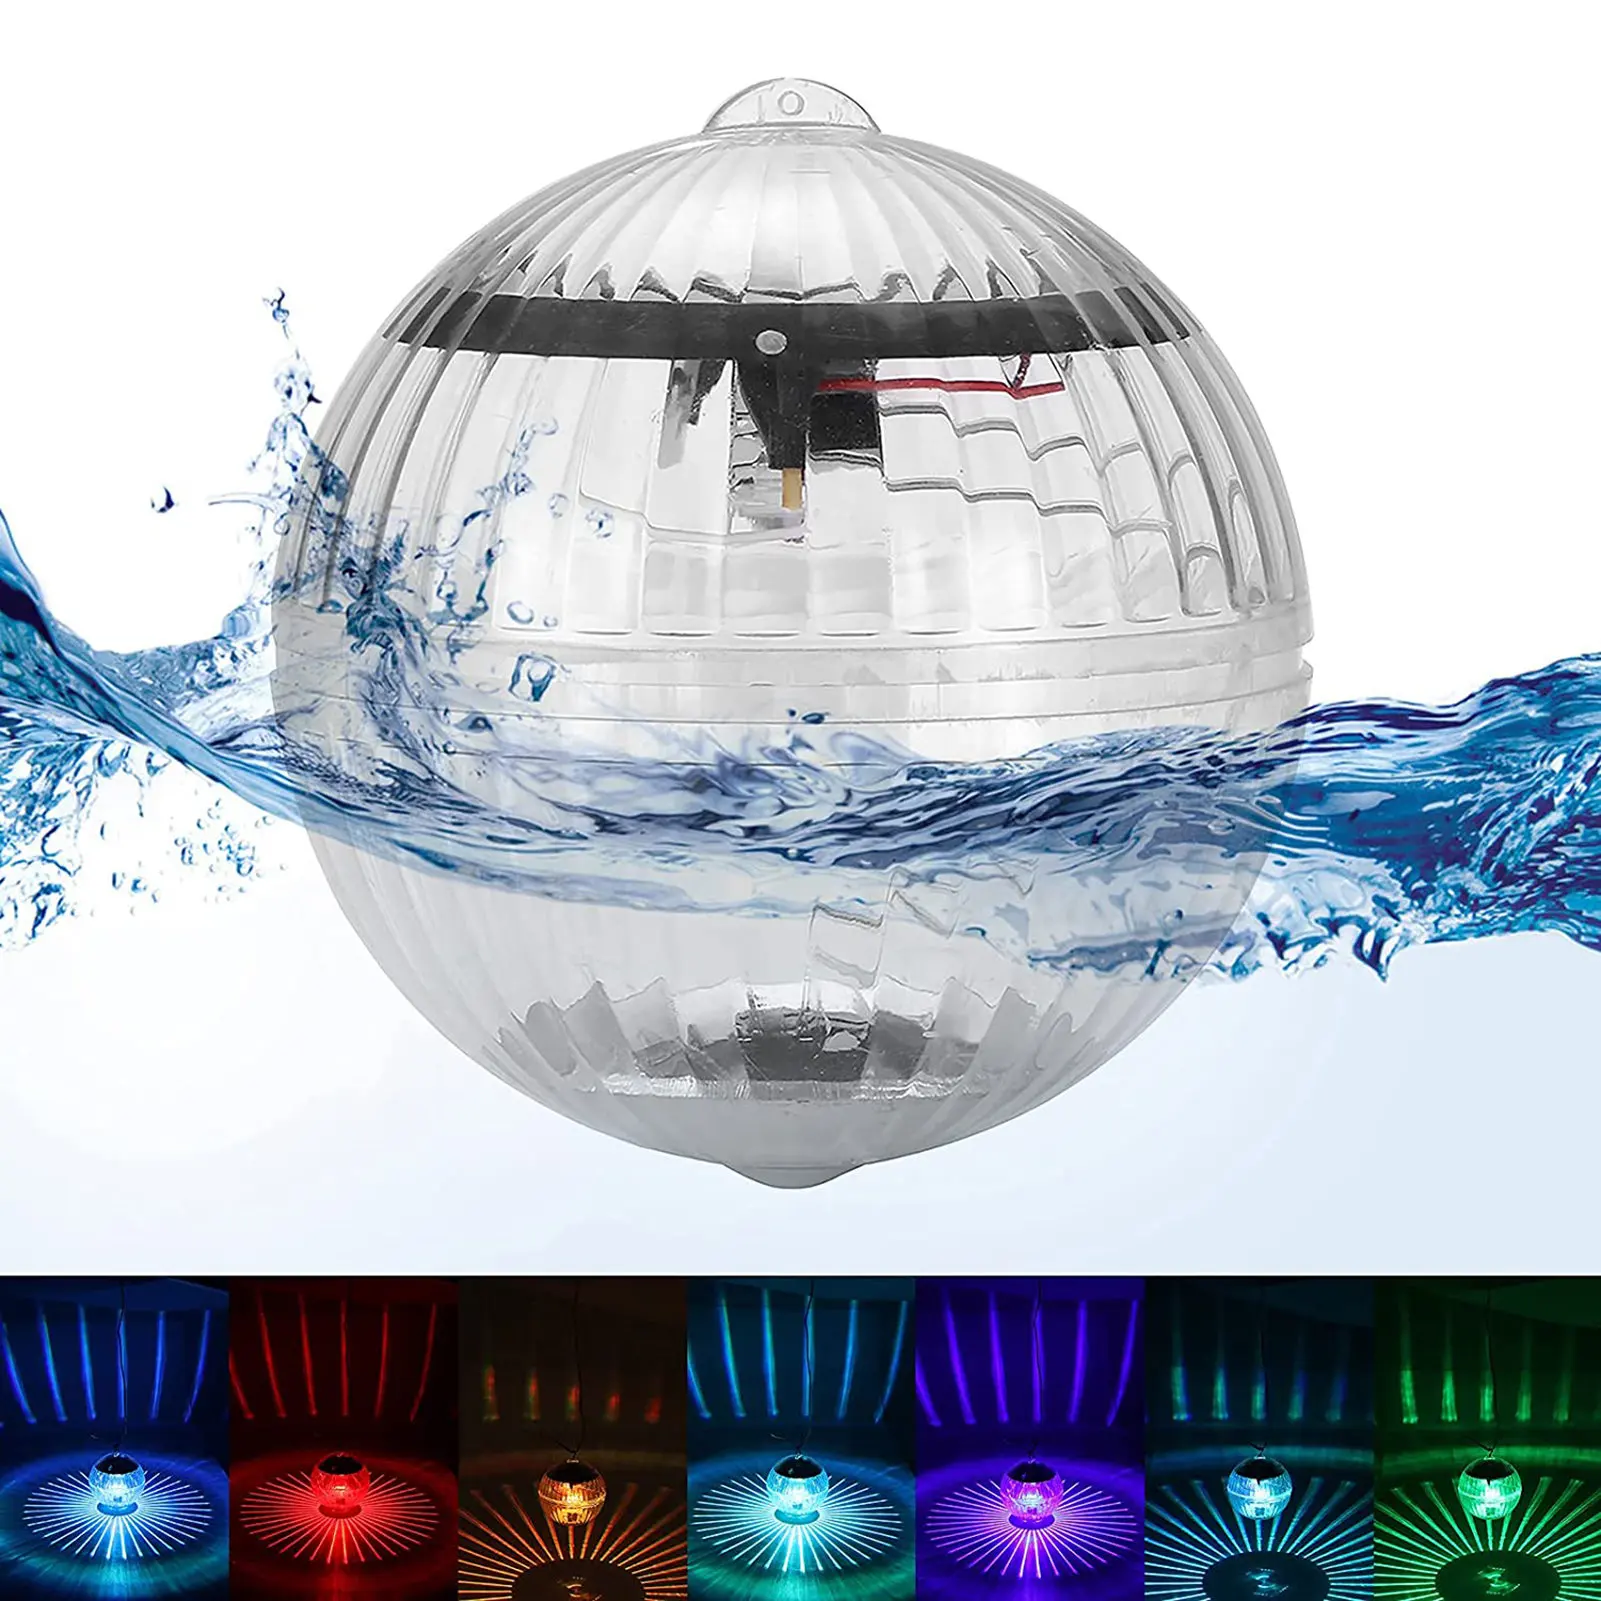 Underwater Ball Lamp Outdoor Floating Solar Powered Color Changing Night Light S - $171.91